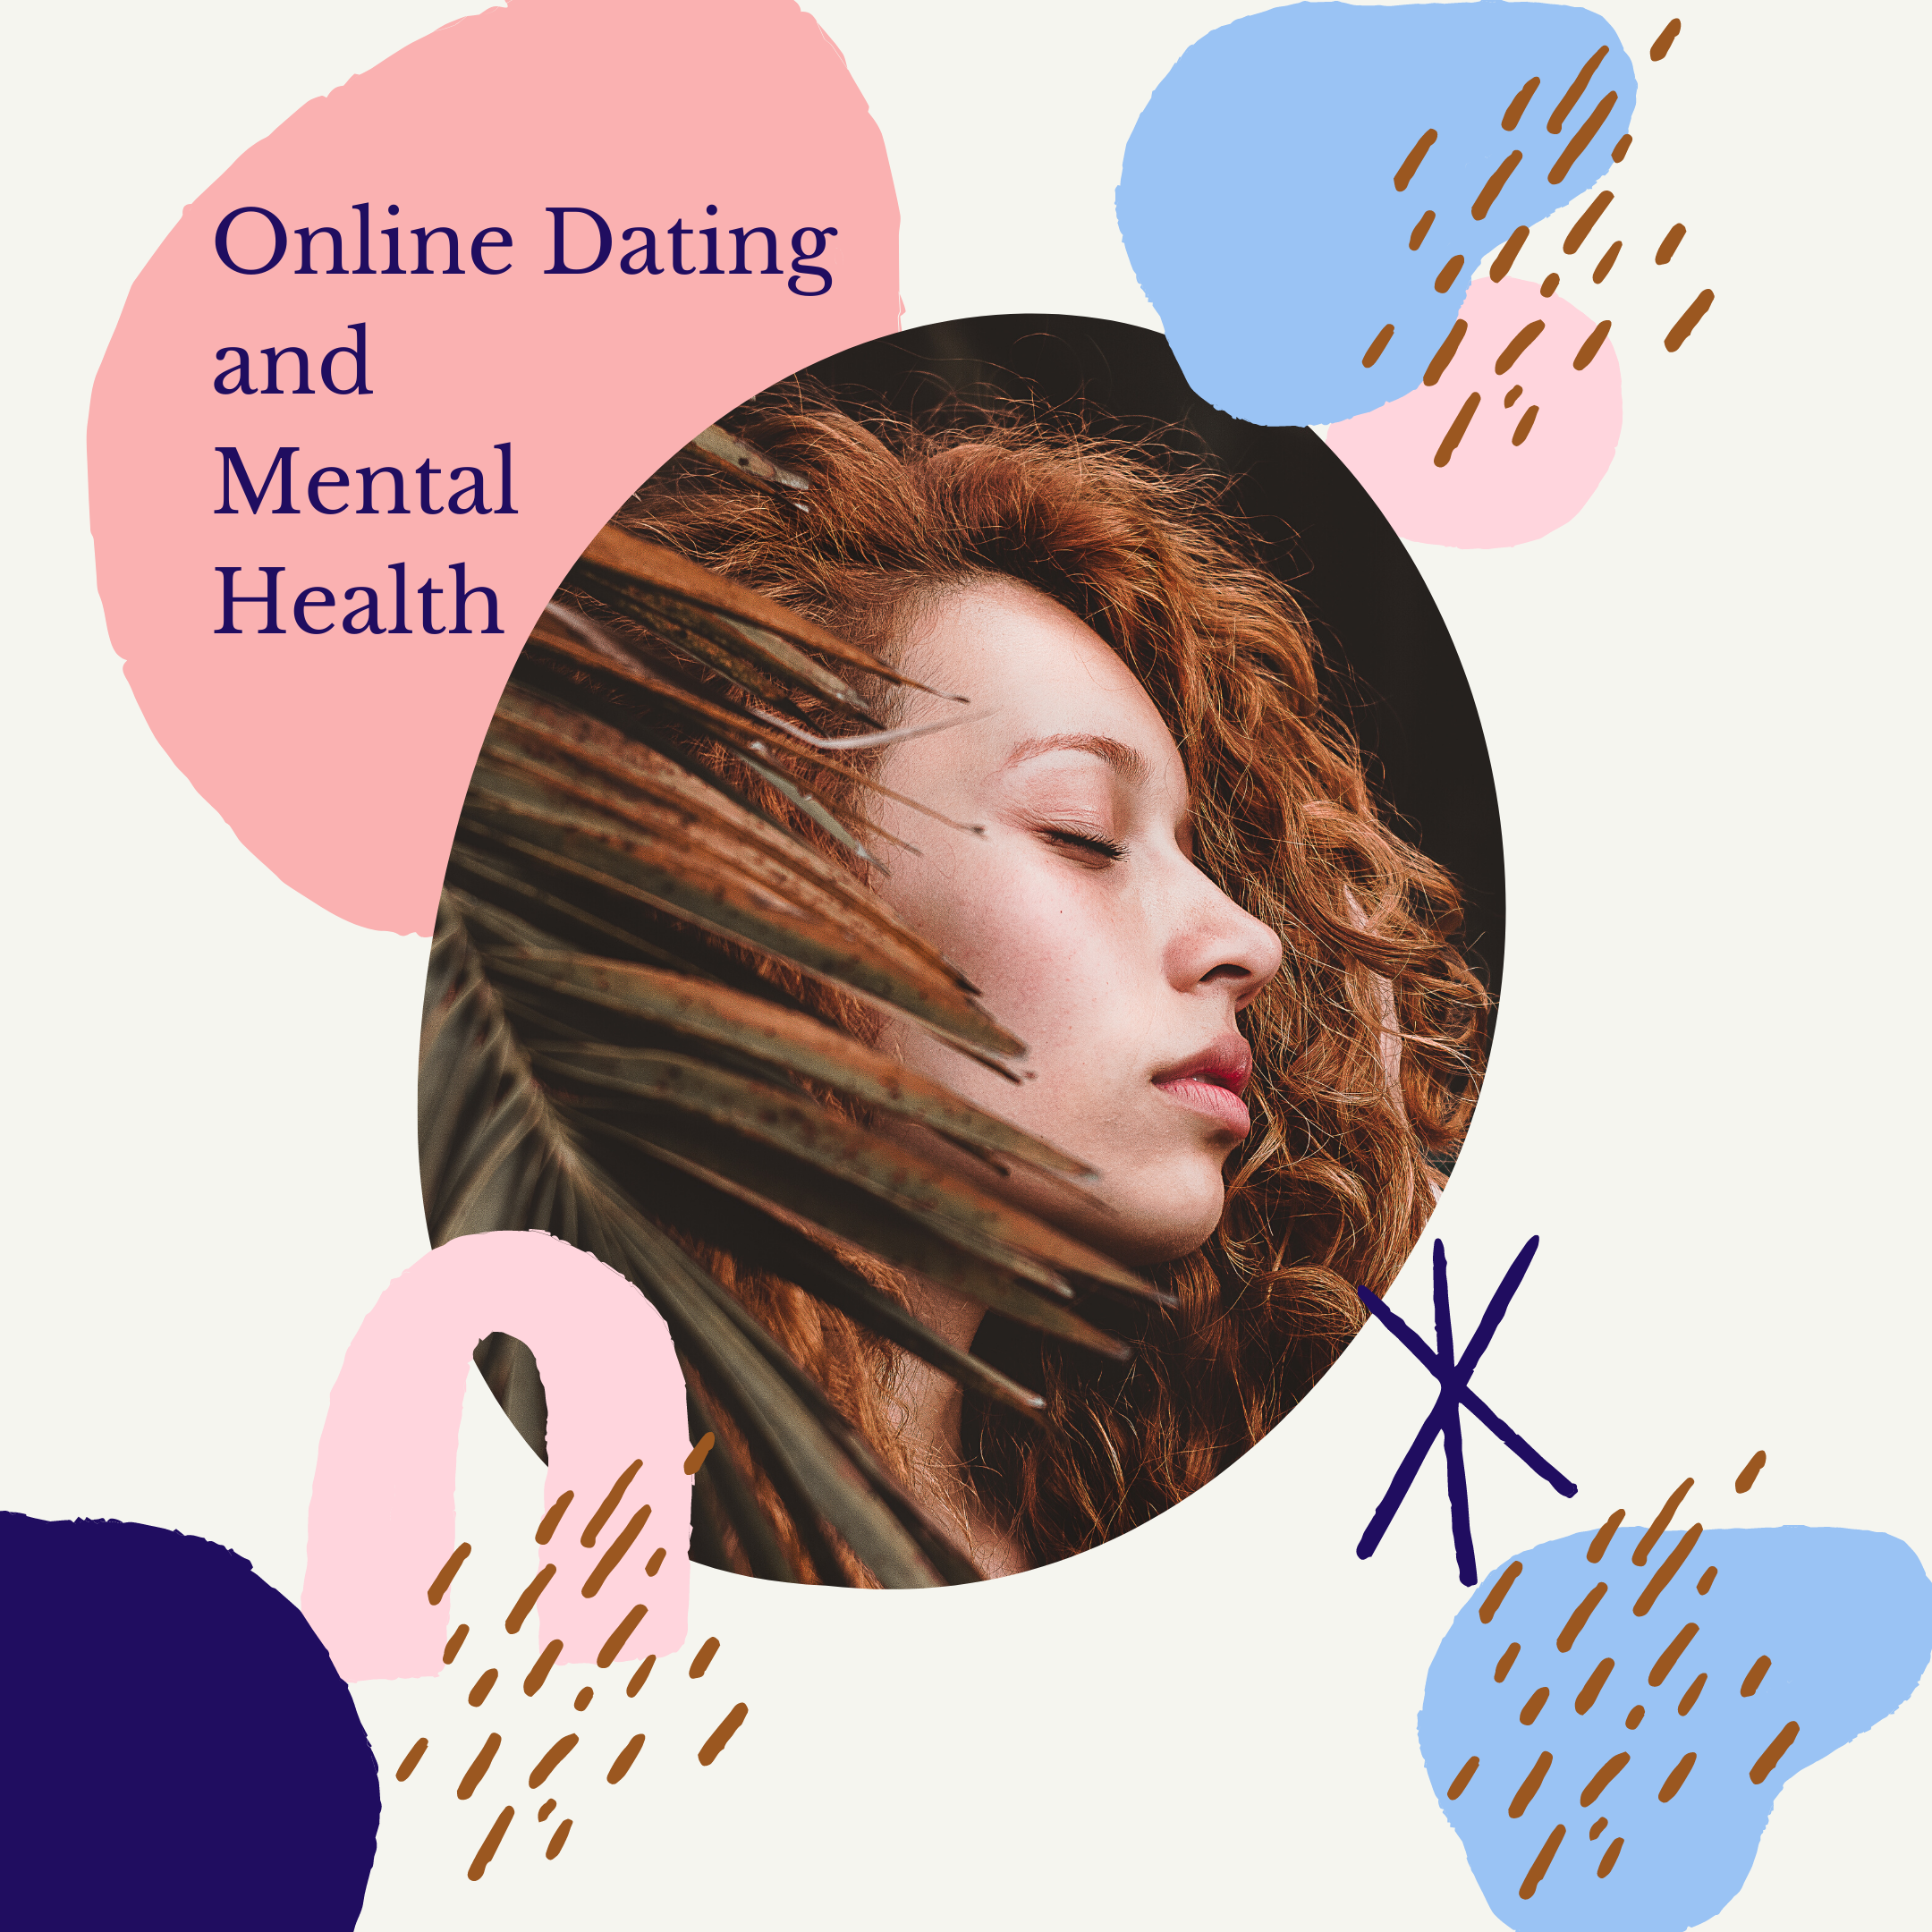 online dating and mental health